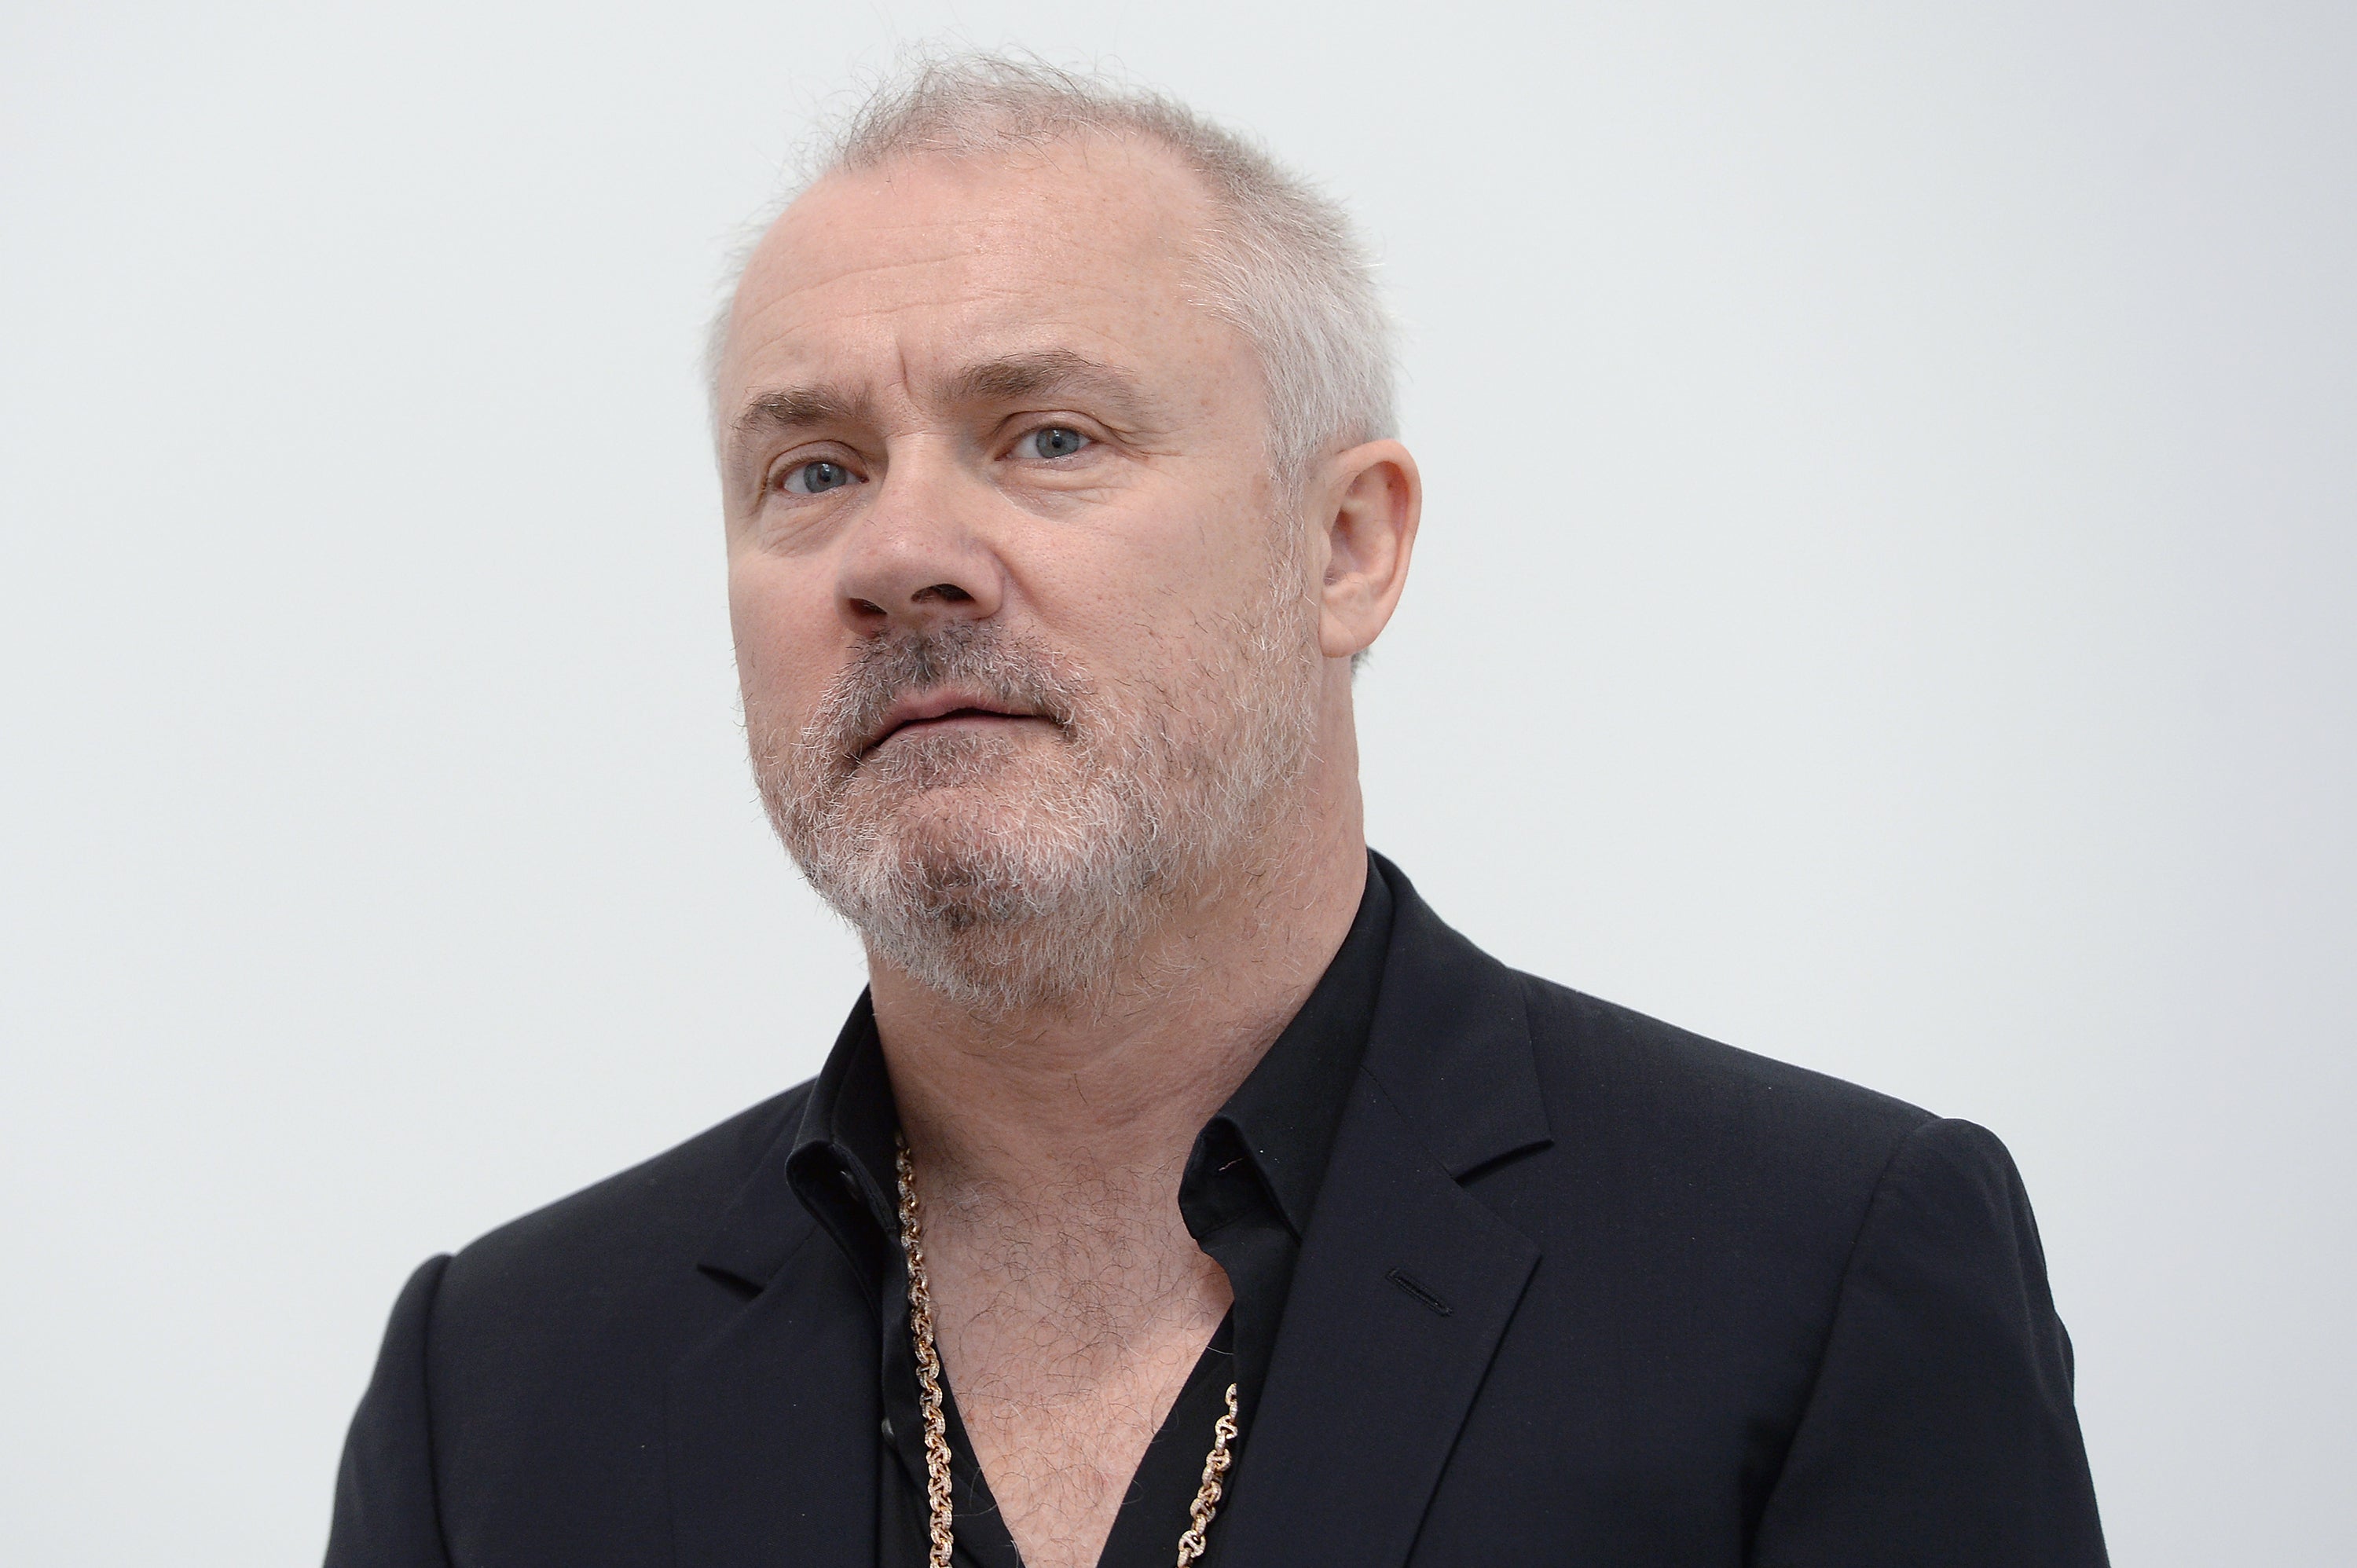 A signed piece of work by British artist Damien Hirst is expected to go for between 100-200,000 dollars (£75-150,000) (Anthony Devlin/PA)